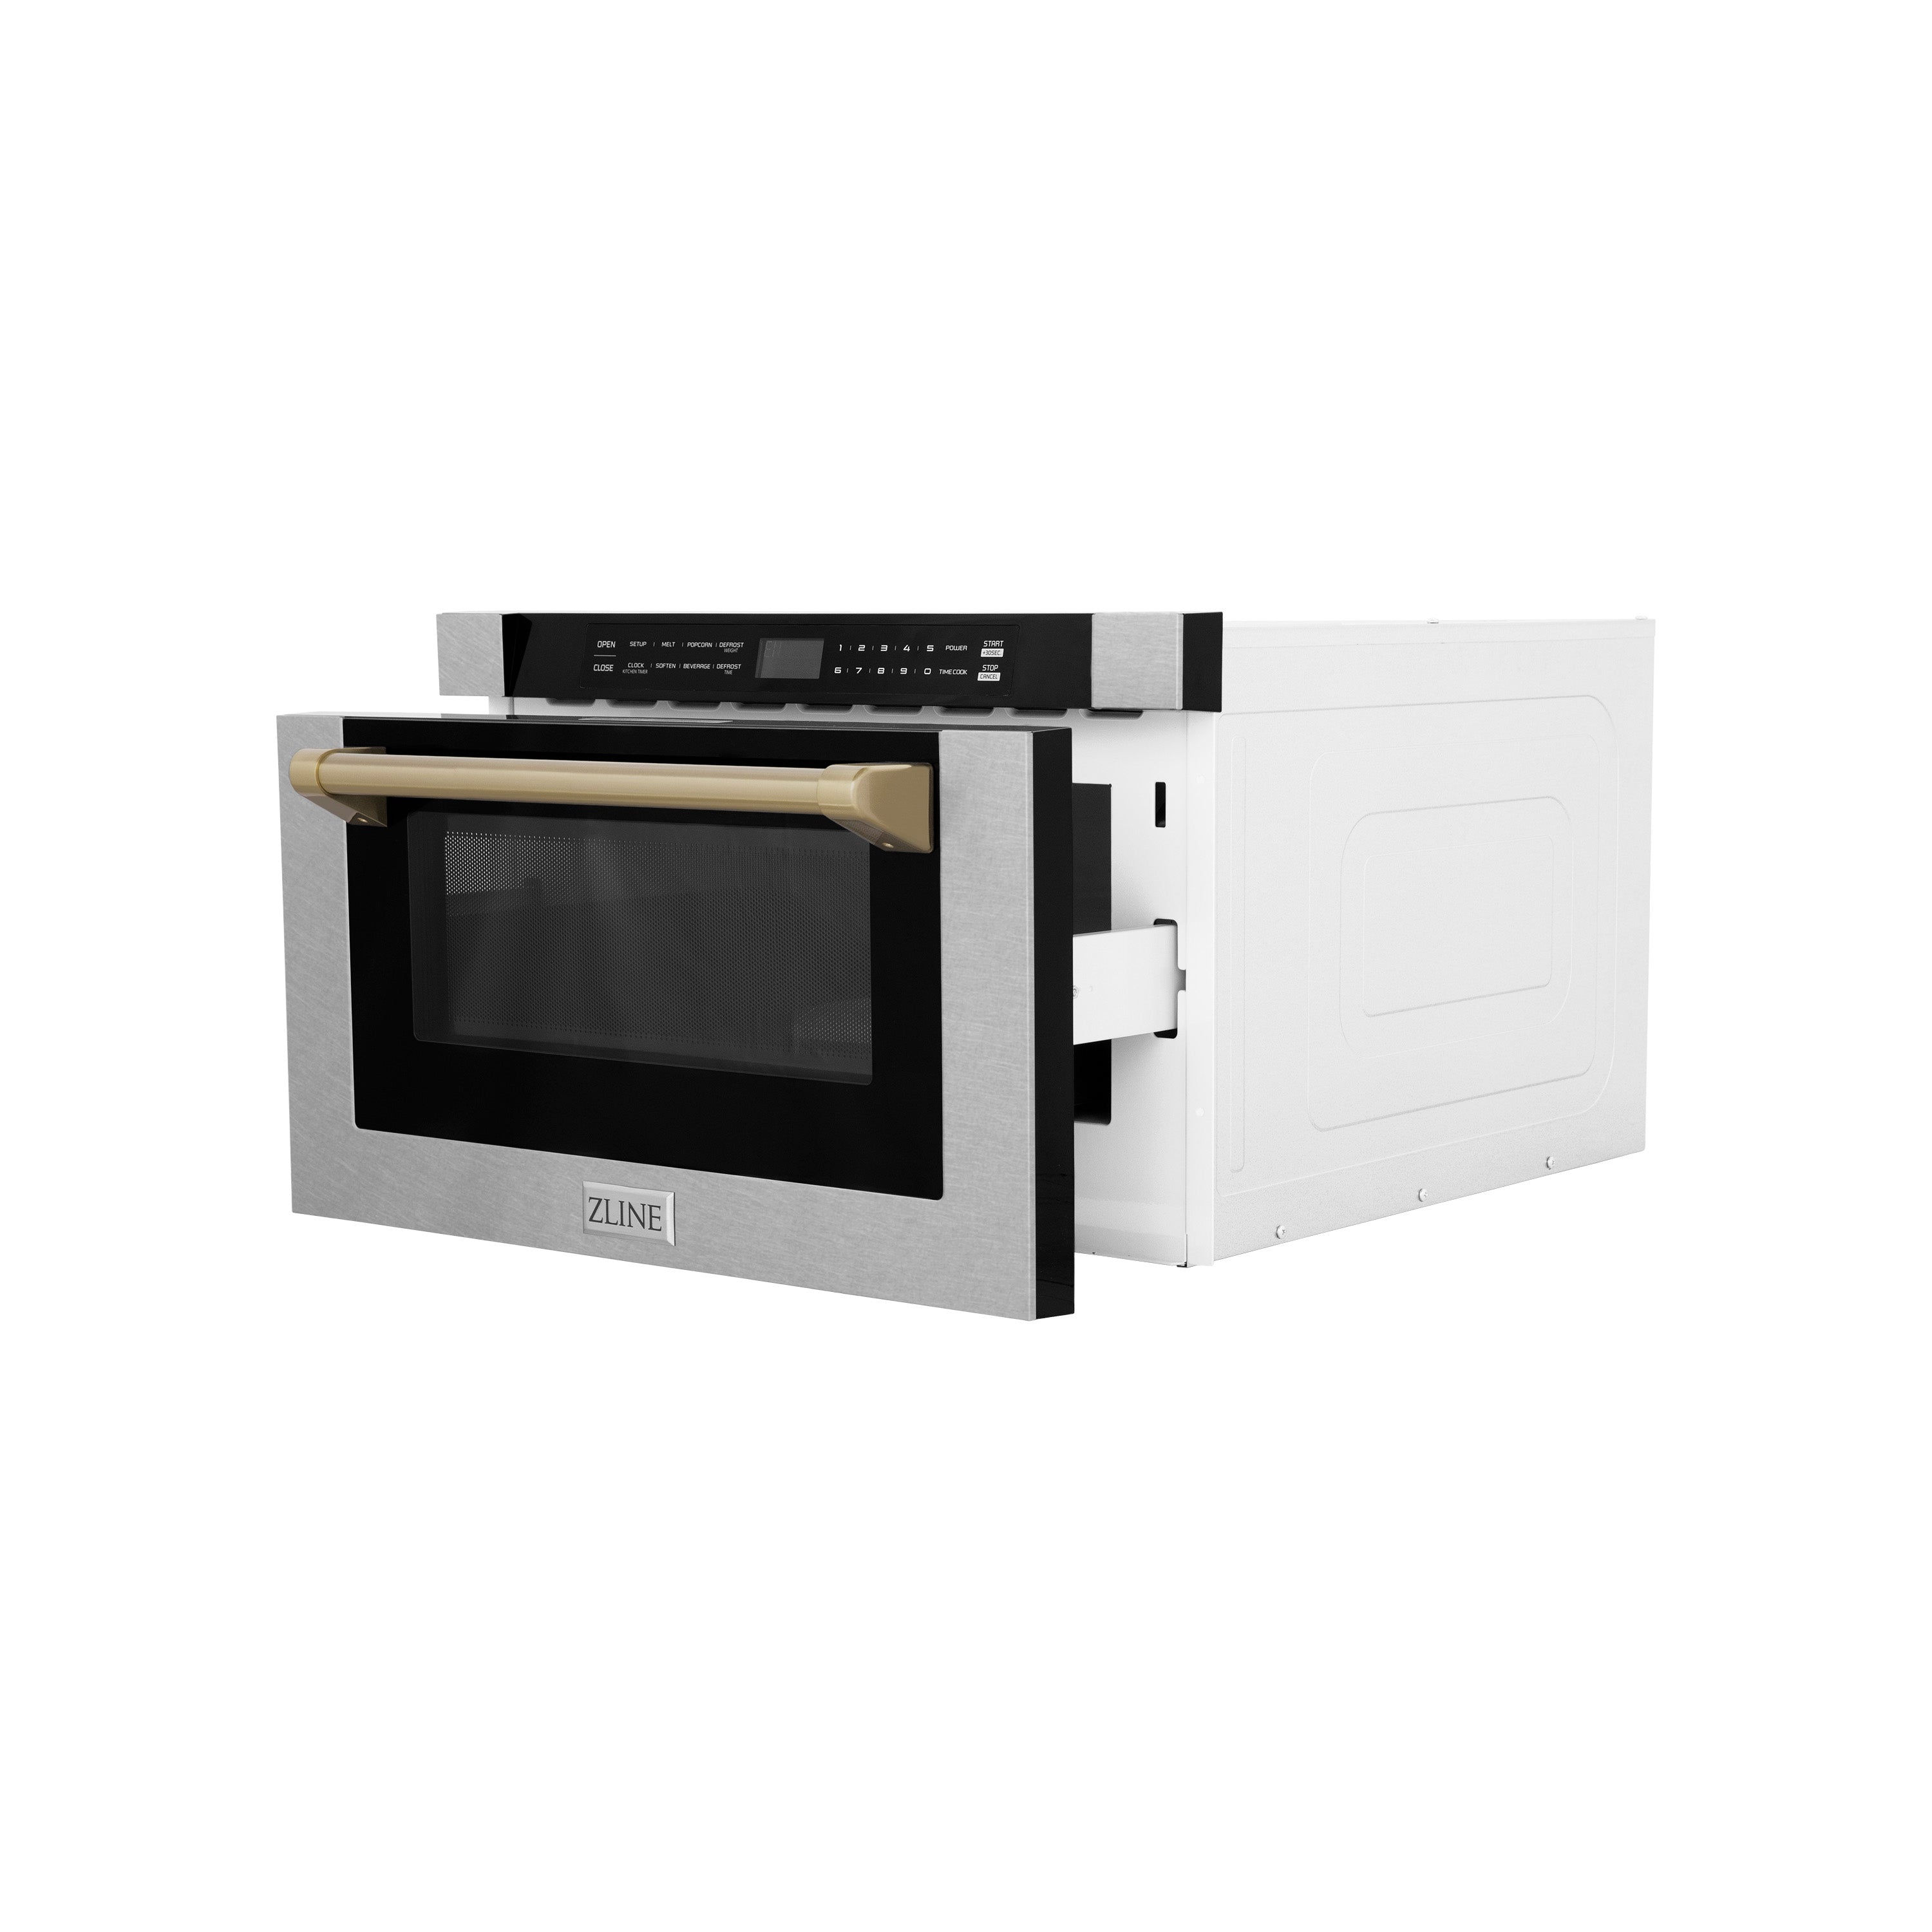 ZLINE Autograph Edition 24 in. Microwave in Fingerprint Resistant Stainless Steel with Traditional Handles and Champagne Bronze Accents (MWDZ-1-SS-H-CB) Side View Drawer Open